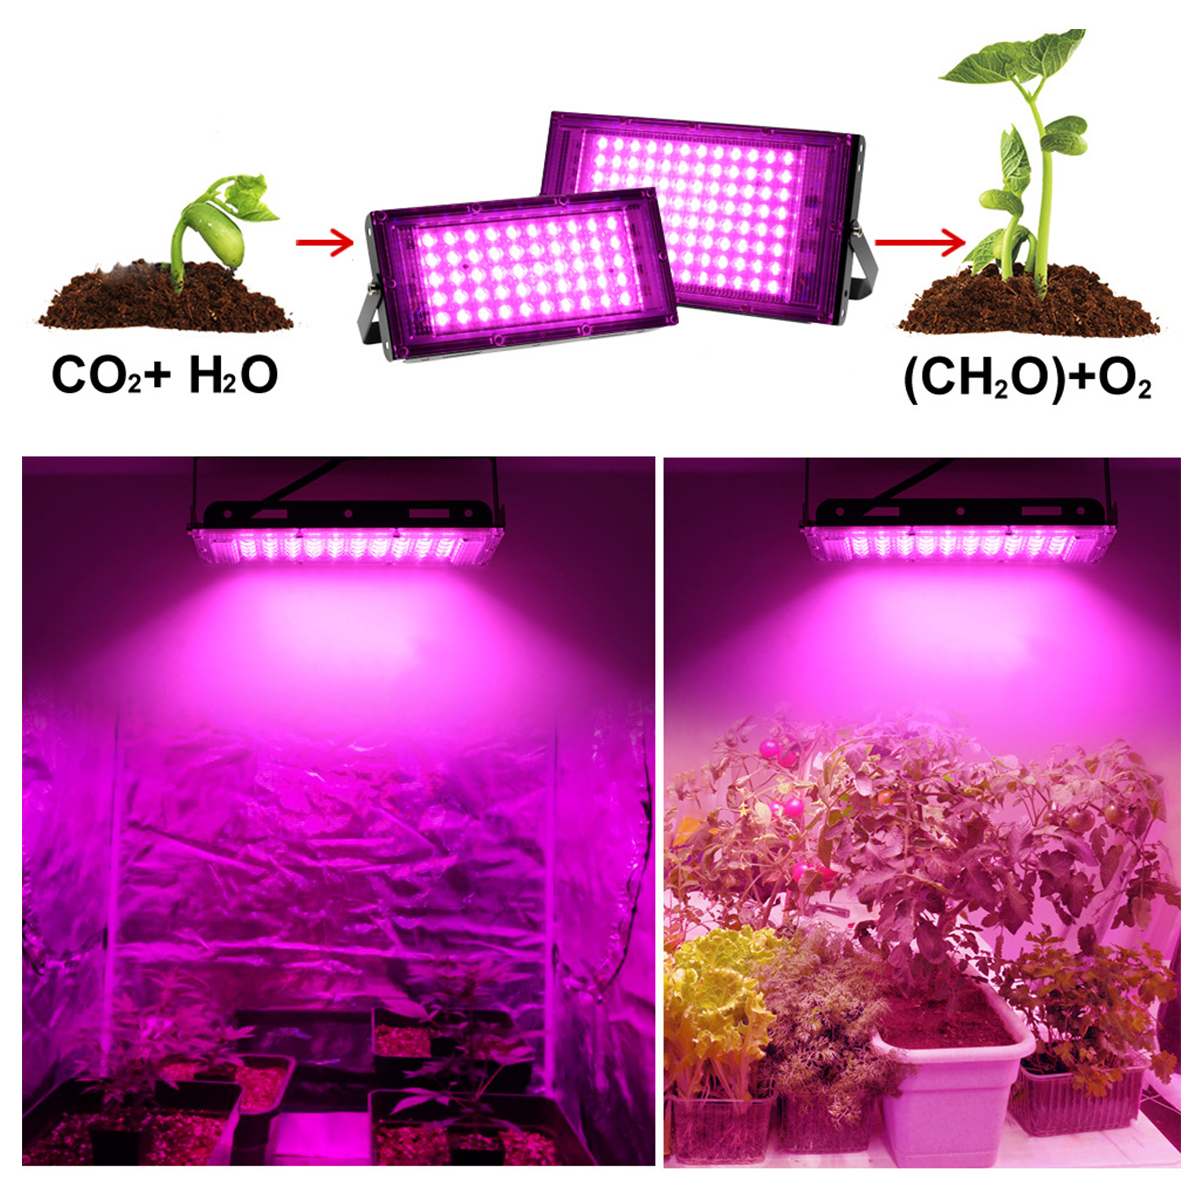 50100W-5096LED-220V-Full-Spectrum-Grow-Light-Plant-Growing-Lamp-Lights-With-Clip-For-Indoor-Plants-1800271-9